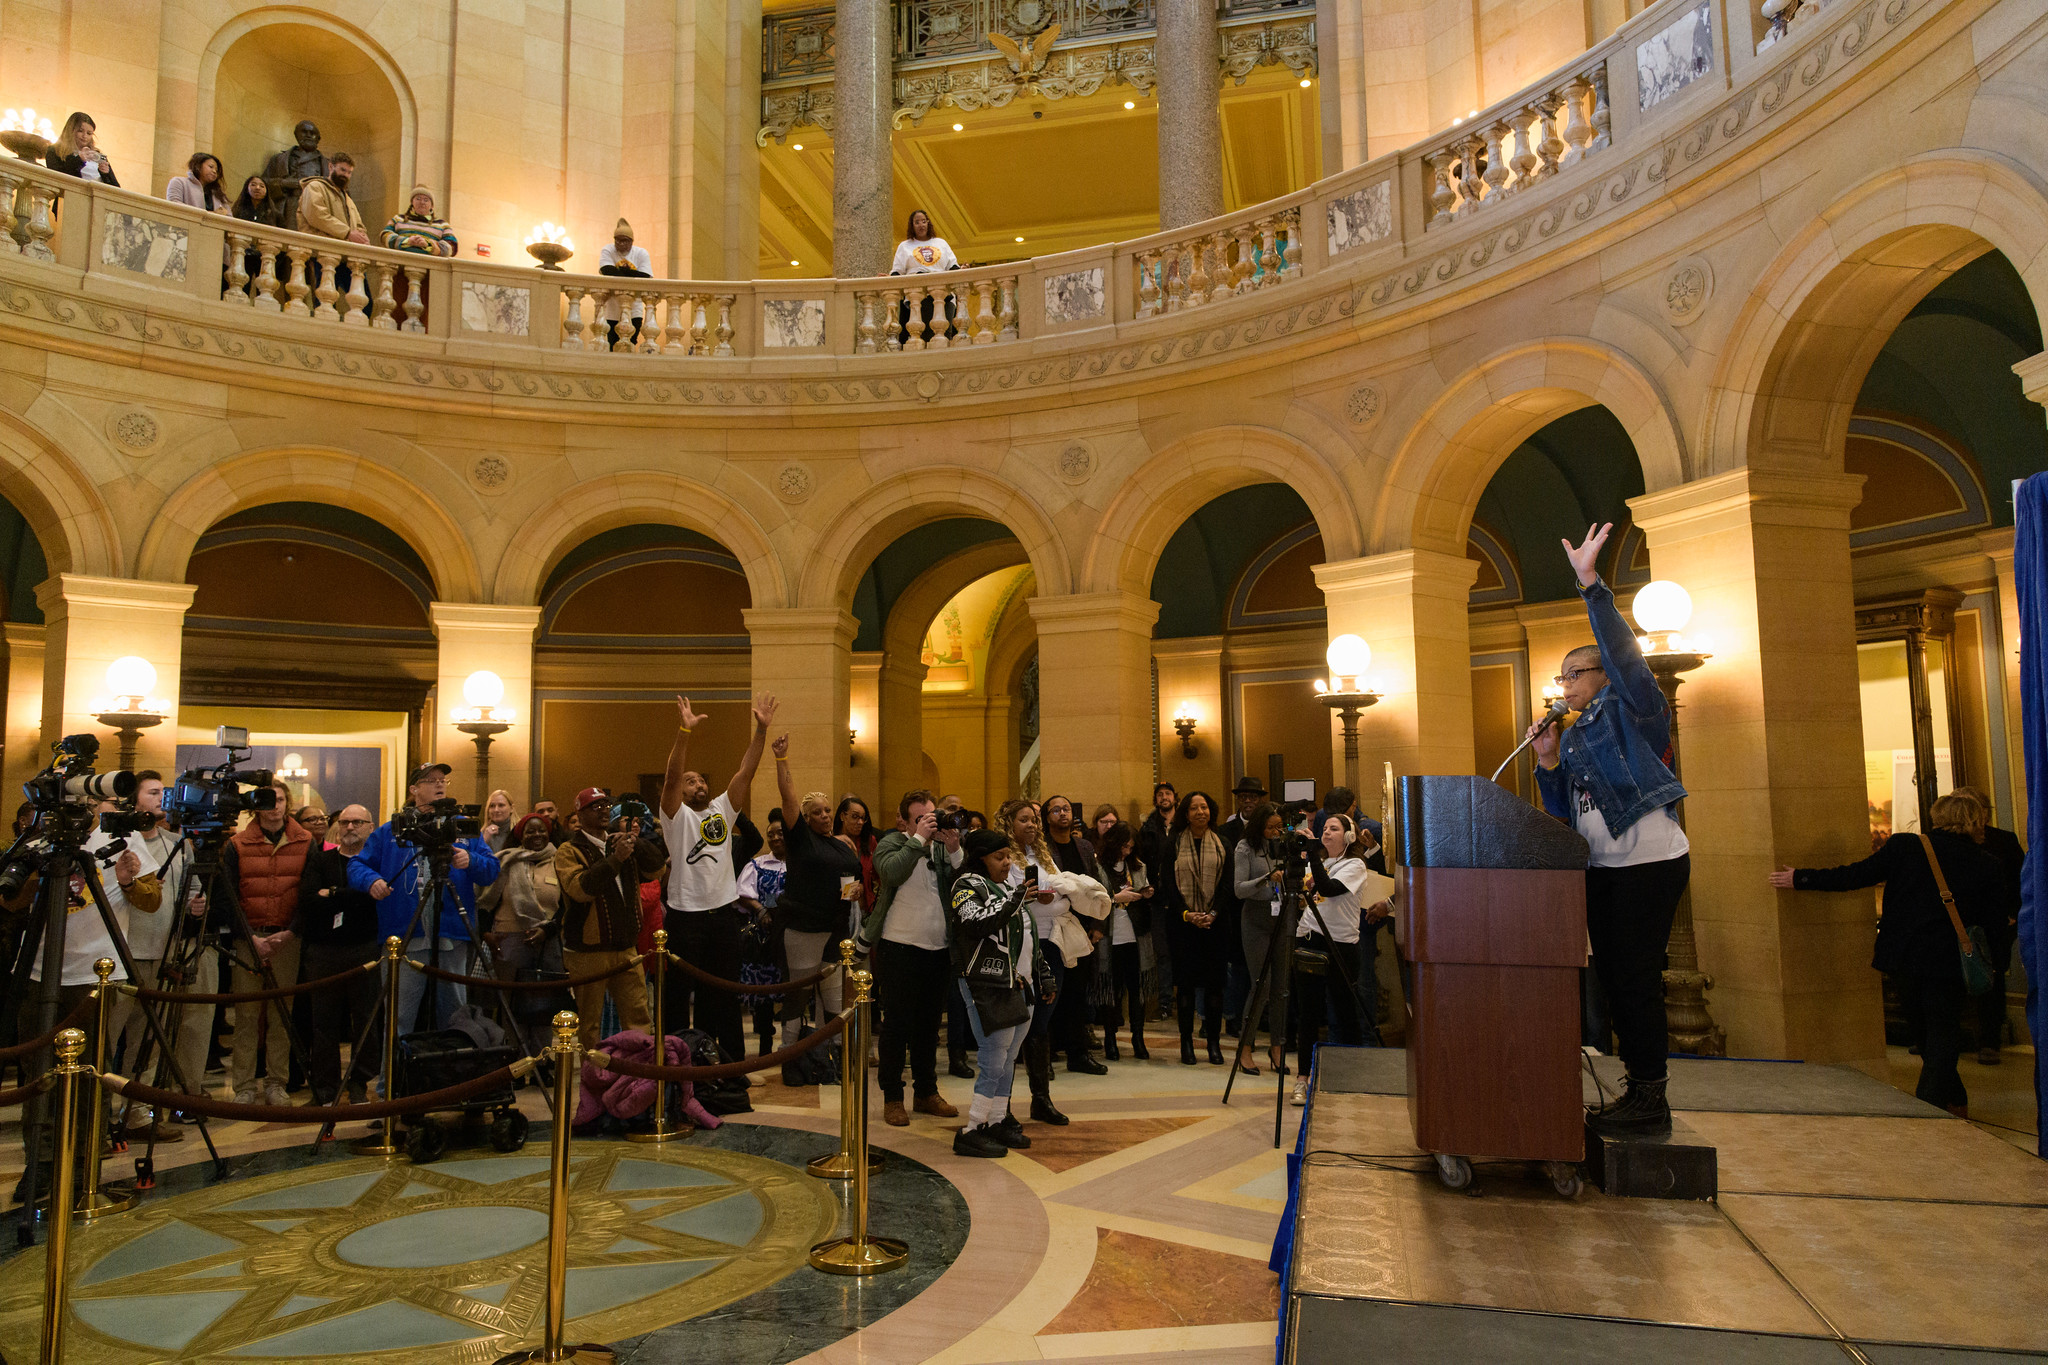 Sheletta Brundidge leads the "Rally in the Rotunda" at the 2nd Annual Black Entrepreneurs Day.